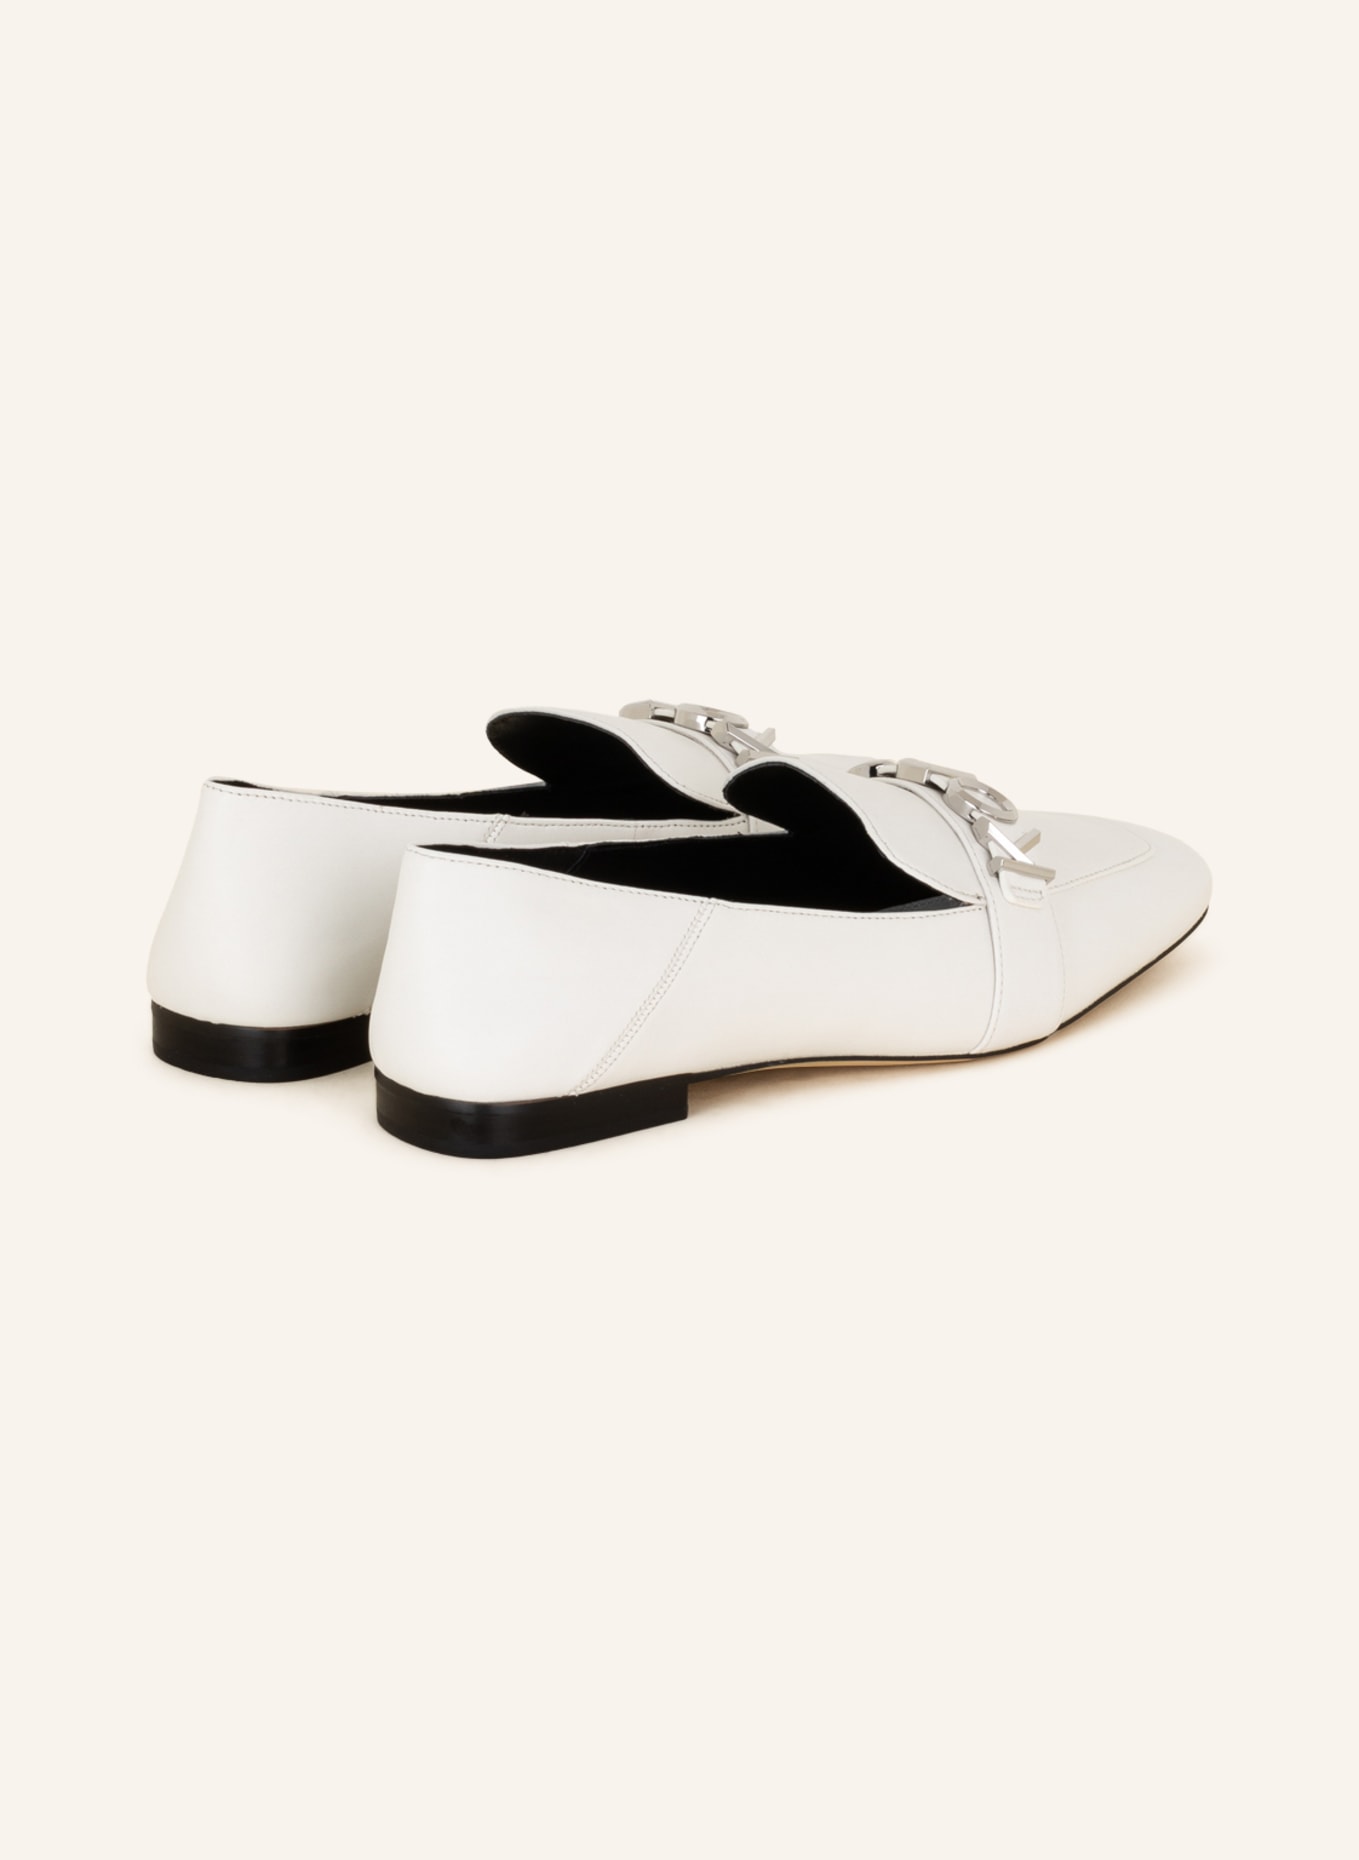 MICHAEL KORS Loafer MADELYN , Farbe: WEISS (Bild 2)